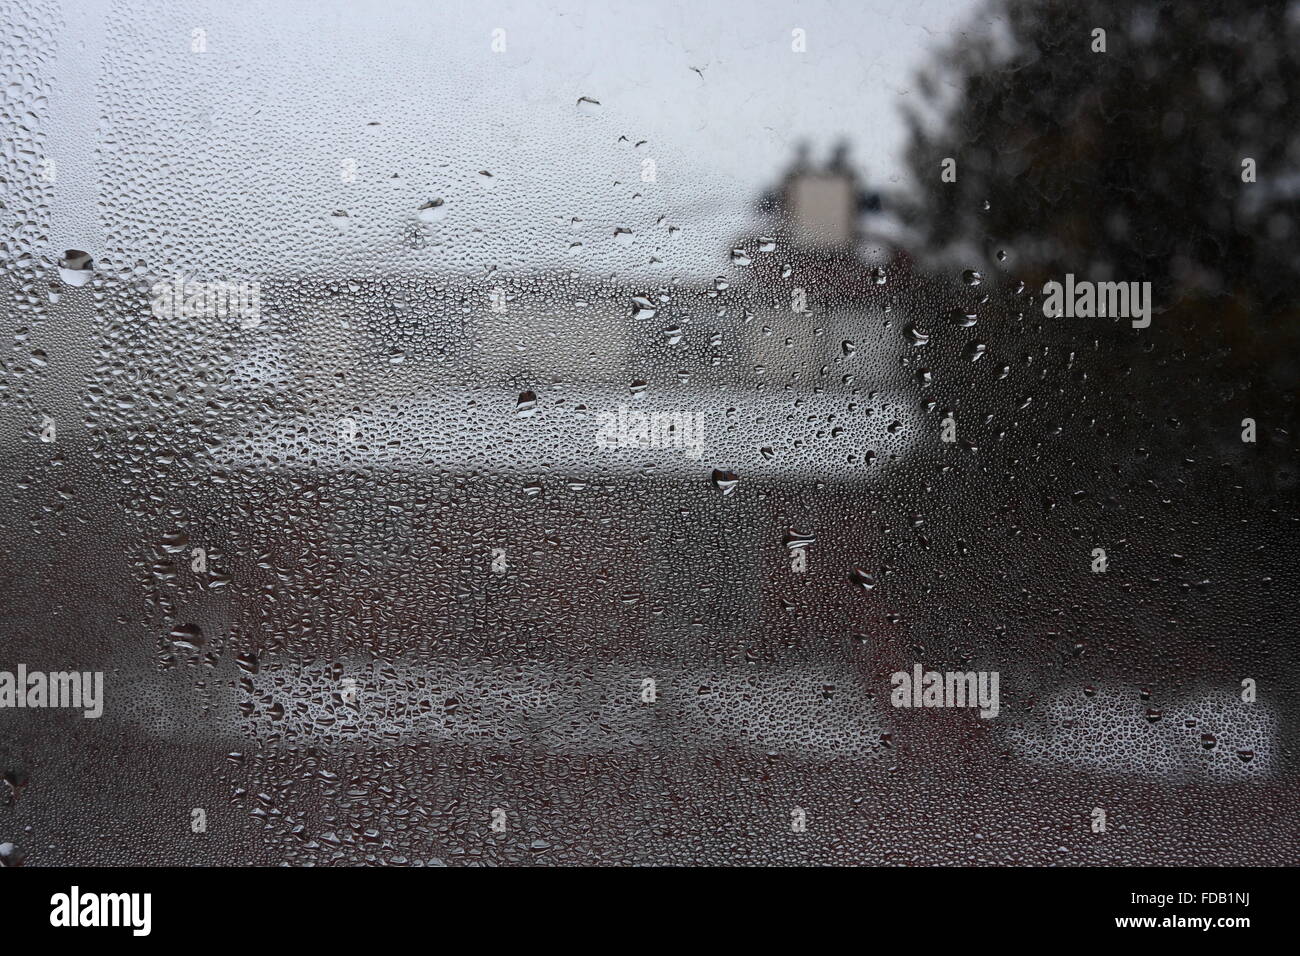 View on the house through the glass pane covered by condensate, January 25, 2016 Stock Photo